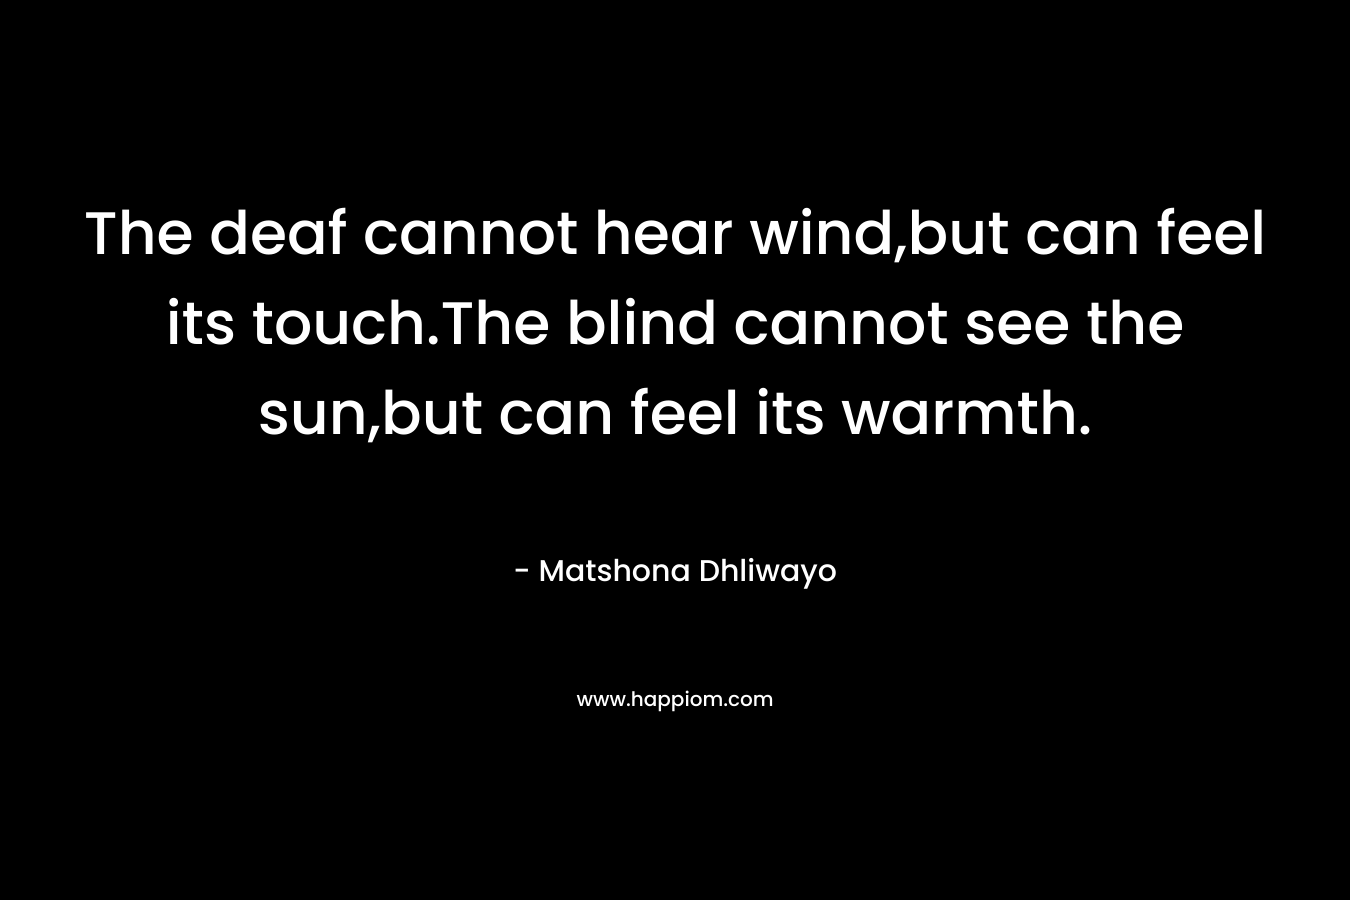 The deaf cannot hear wind,but can feel its touch.The blind cannot see the sun,but can feel its warmth.